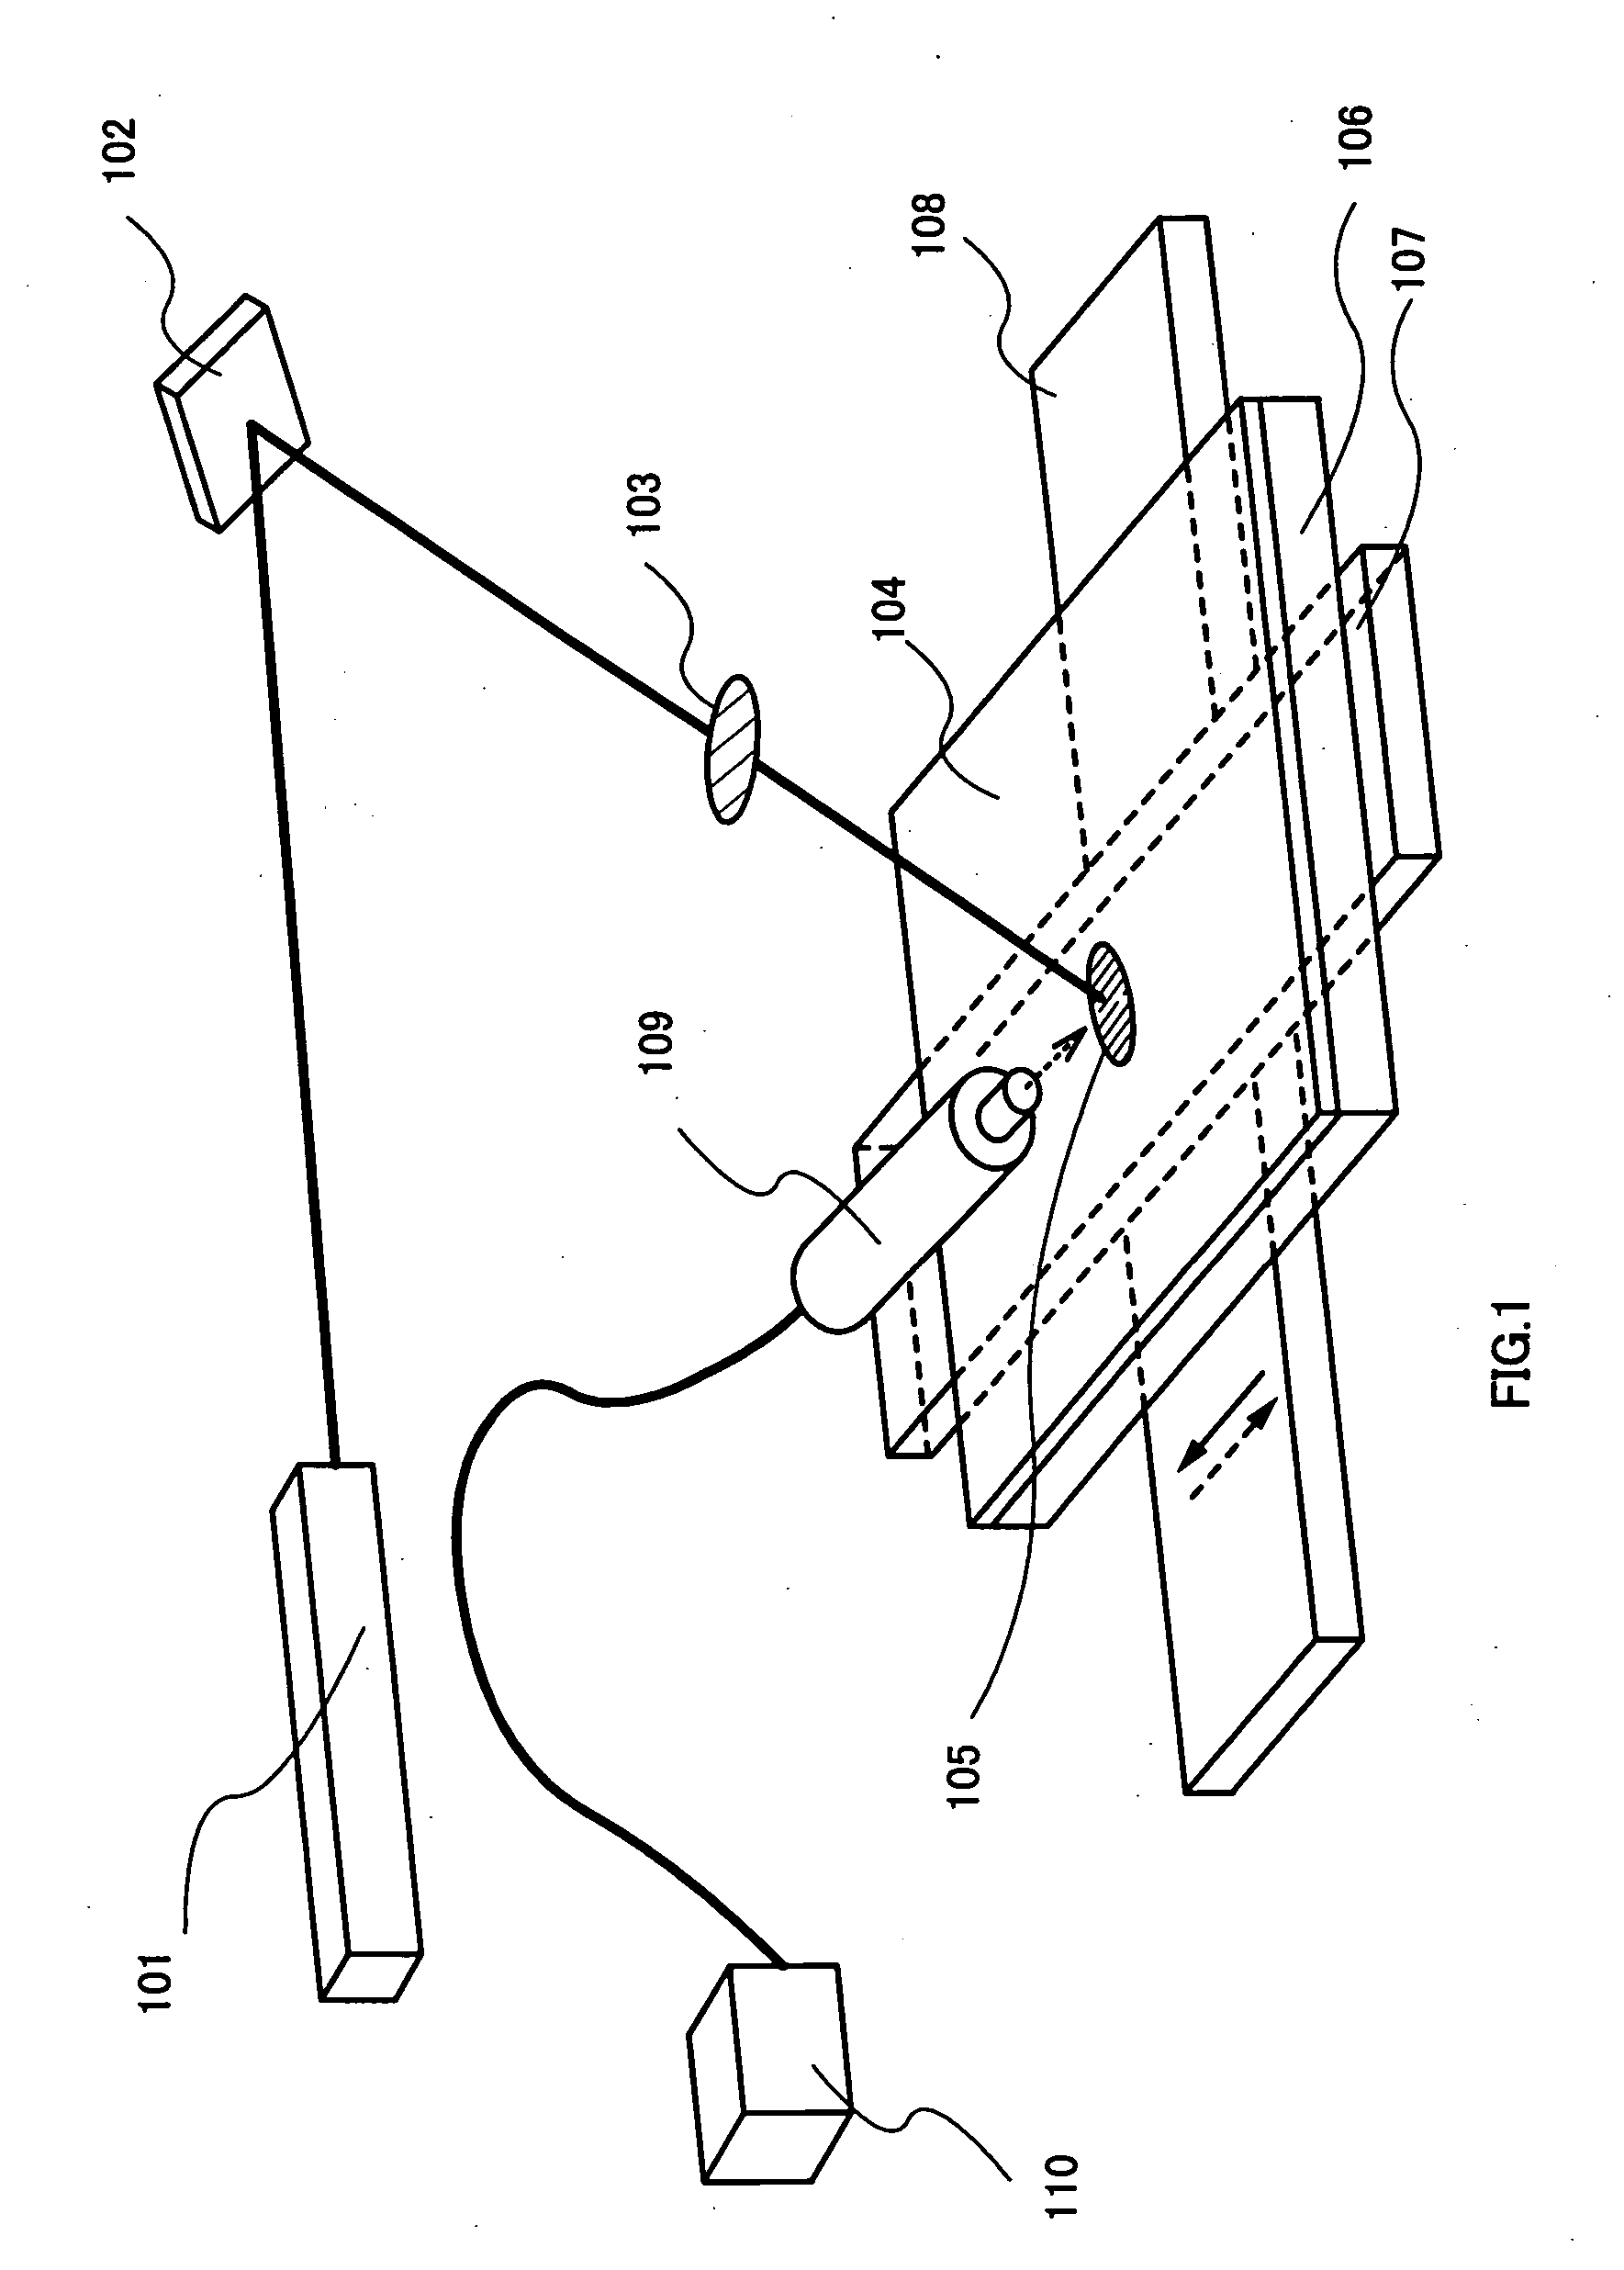 Laser processing unit, laser processing method, and method for manufacturing semiconductor device